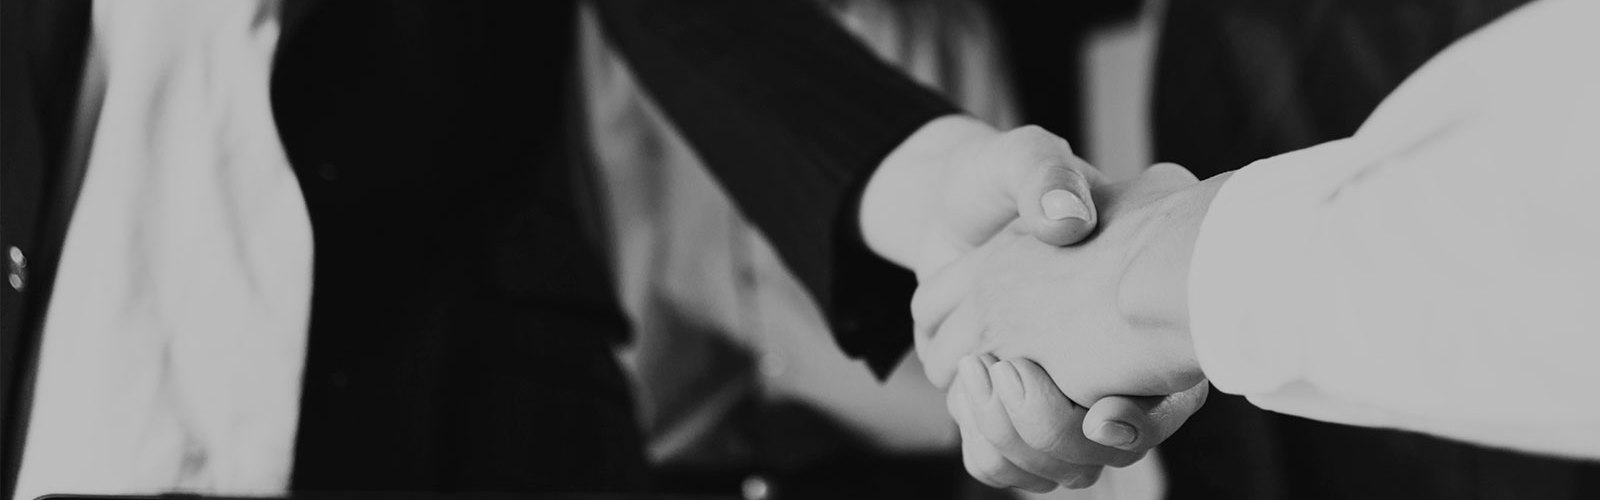 Close up of two people shaking hands